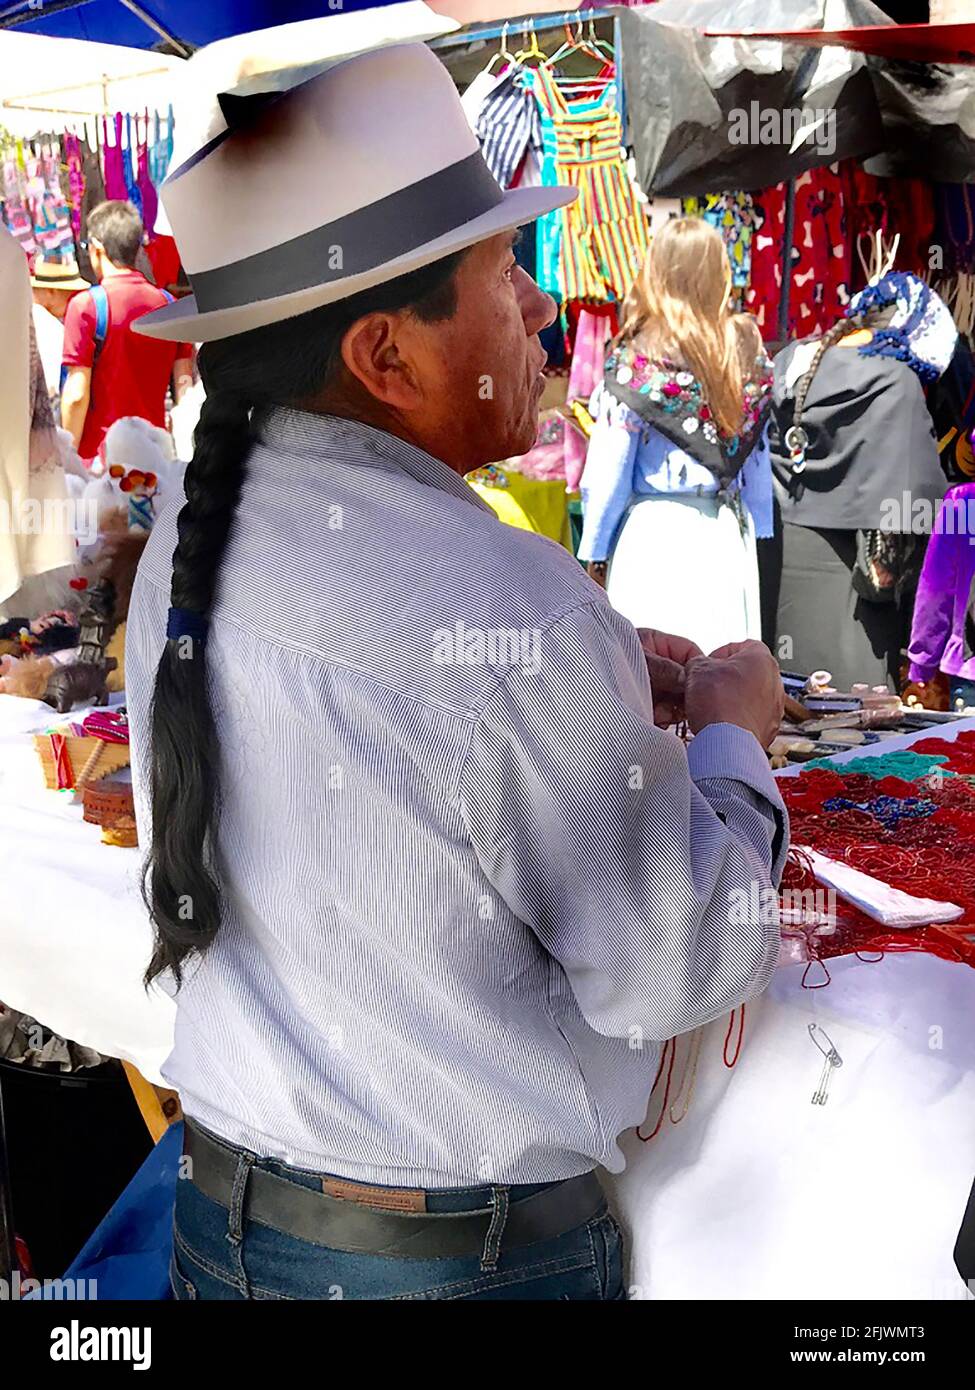 Otavalo is a town in the Andean highlands in the Imbabura Province of northern Ecuador. It’s surrounded by volcanoes including the Imbabura Volcano. Stock Photo